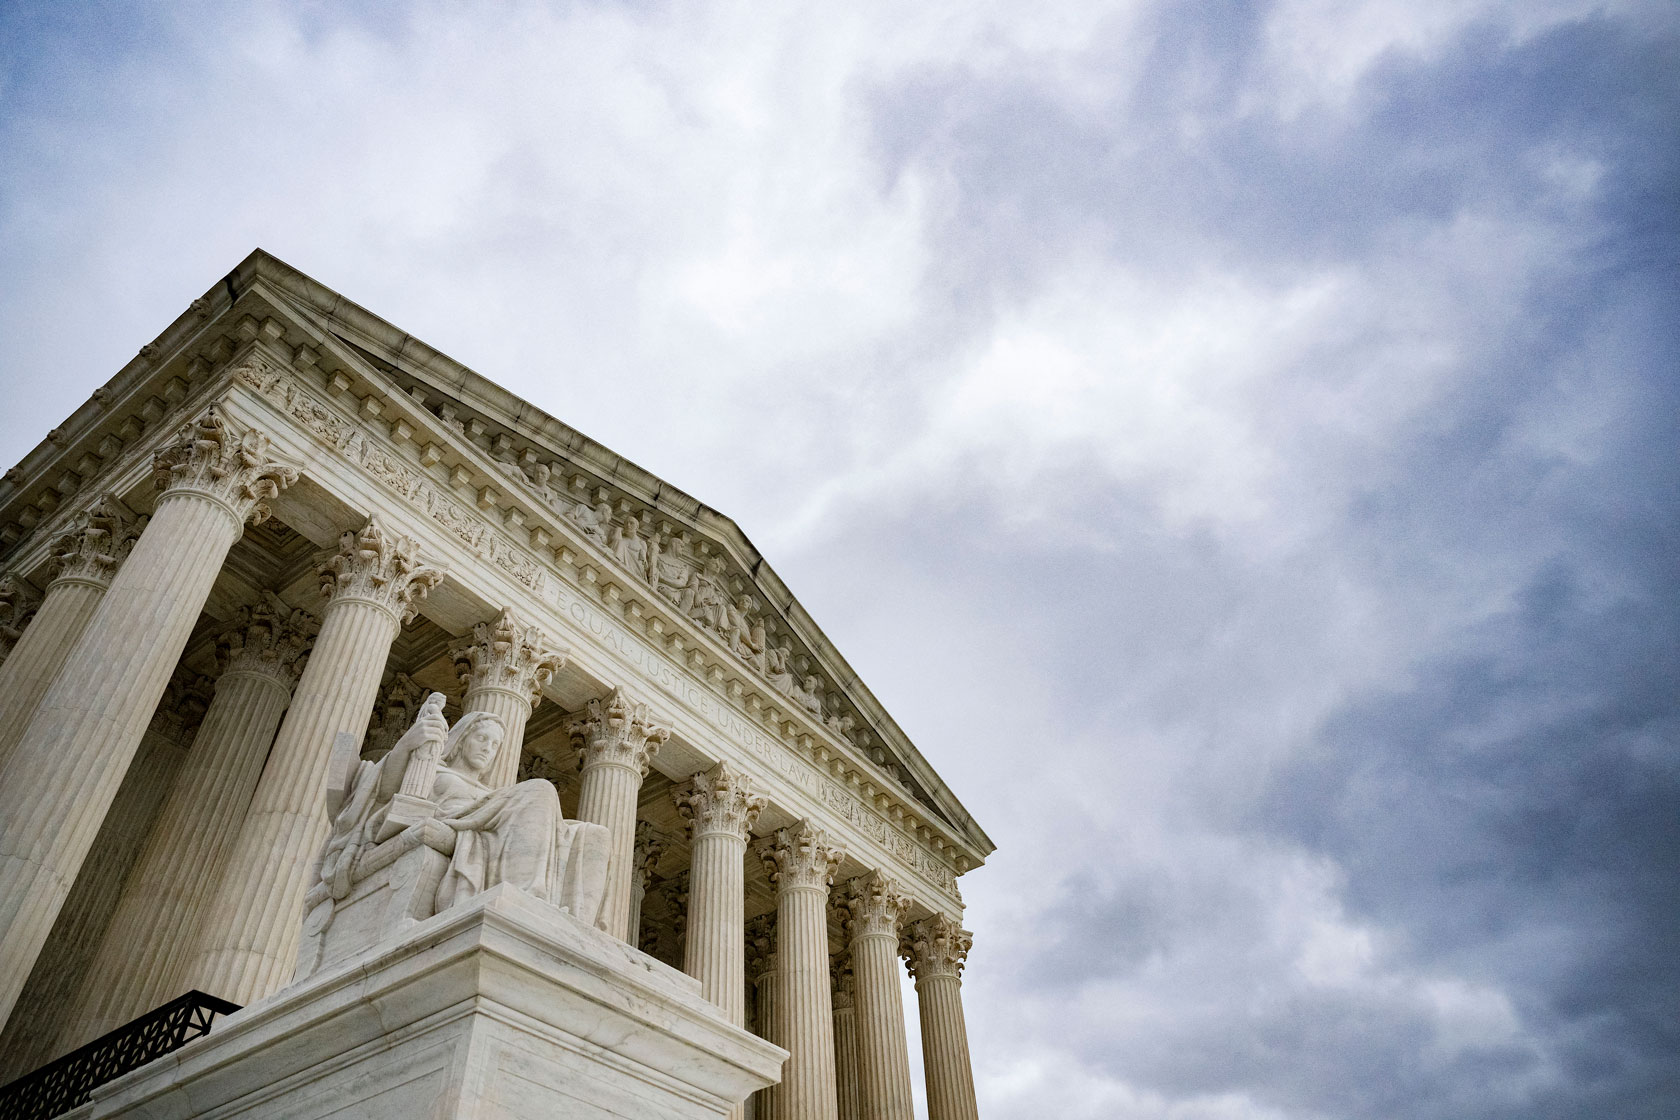 The U.S. Supreme Court building is seen in front of a cloudy sky.